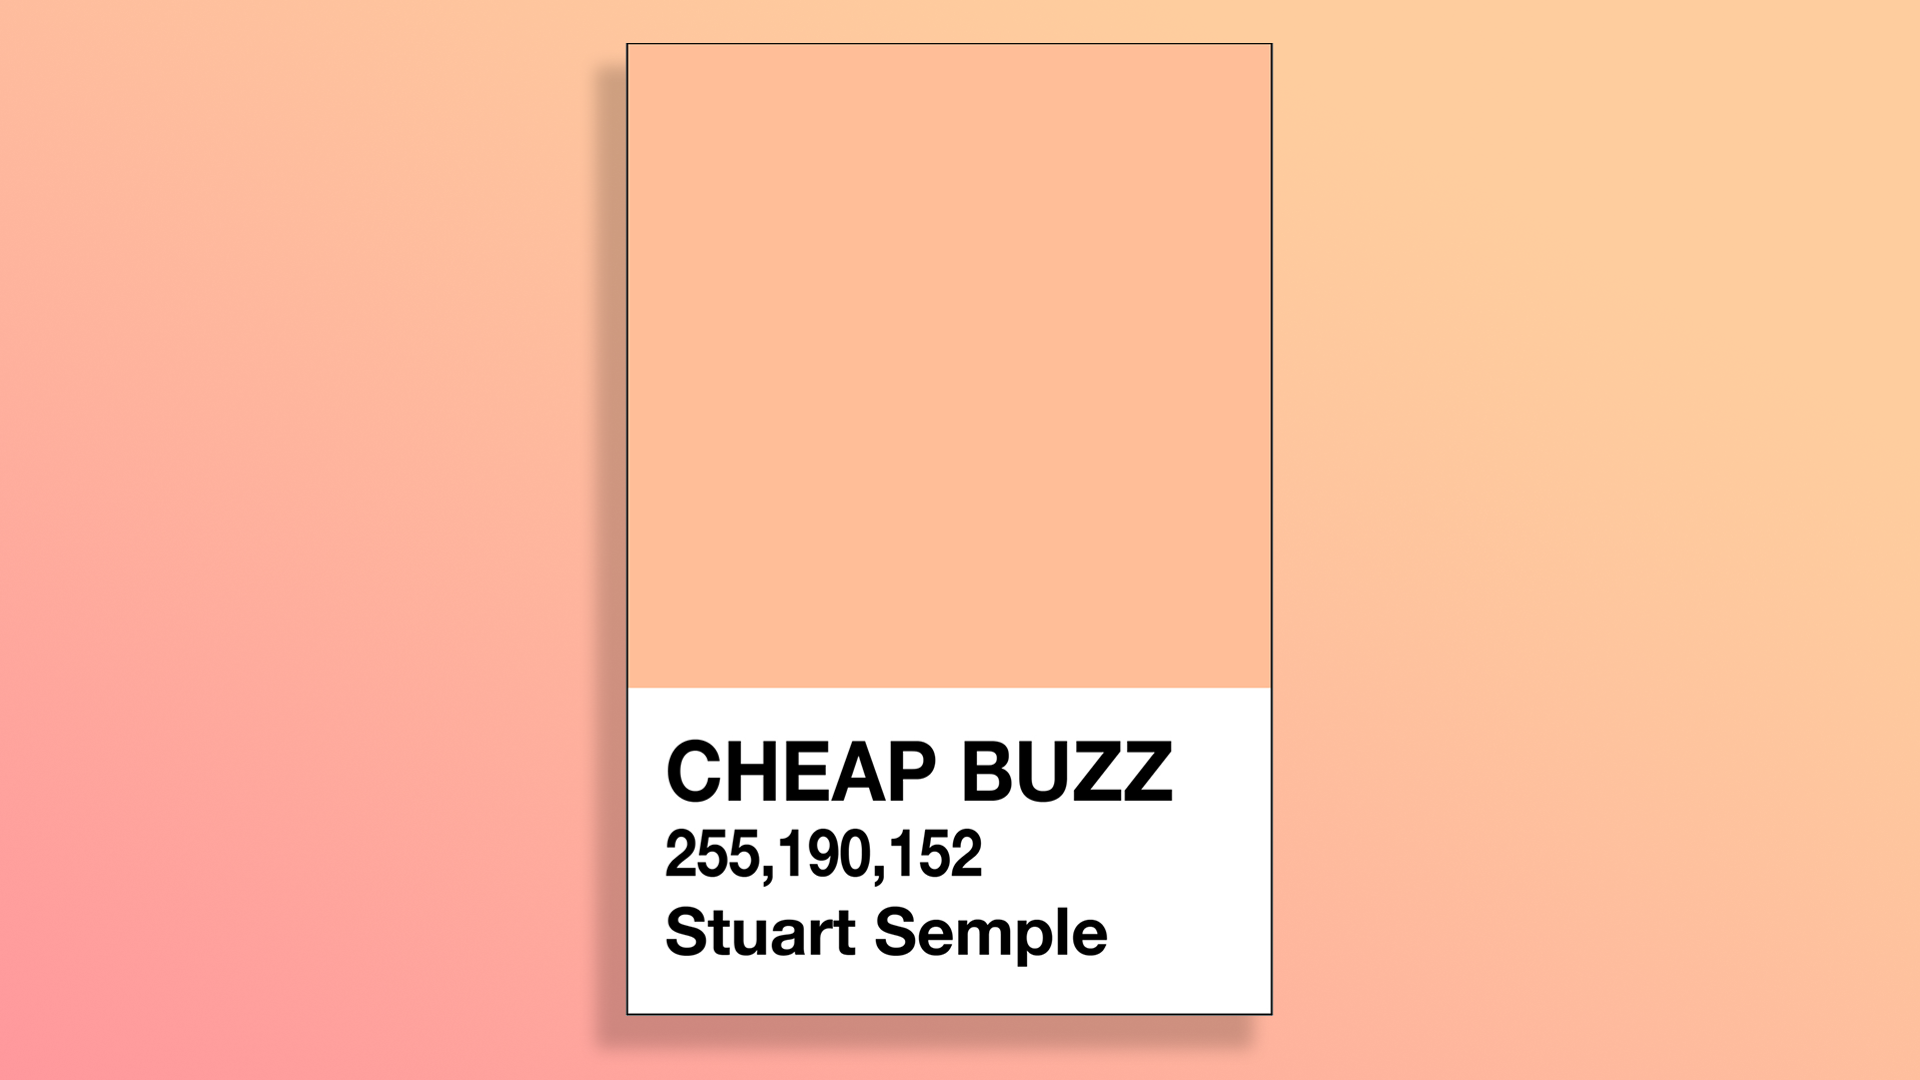 Featured image for Stuart Semple Announces ‘Cheap Buzz’ in Response to Pantone’s Color of the Year